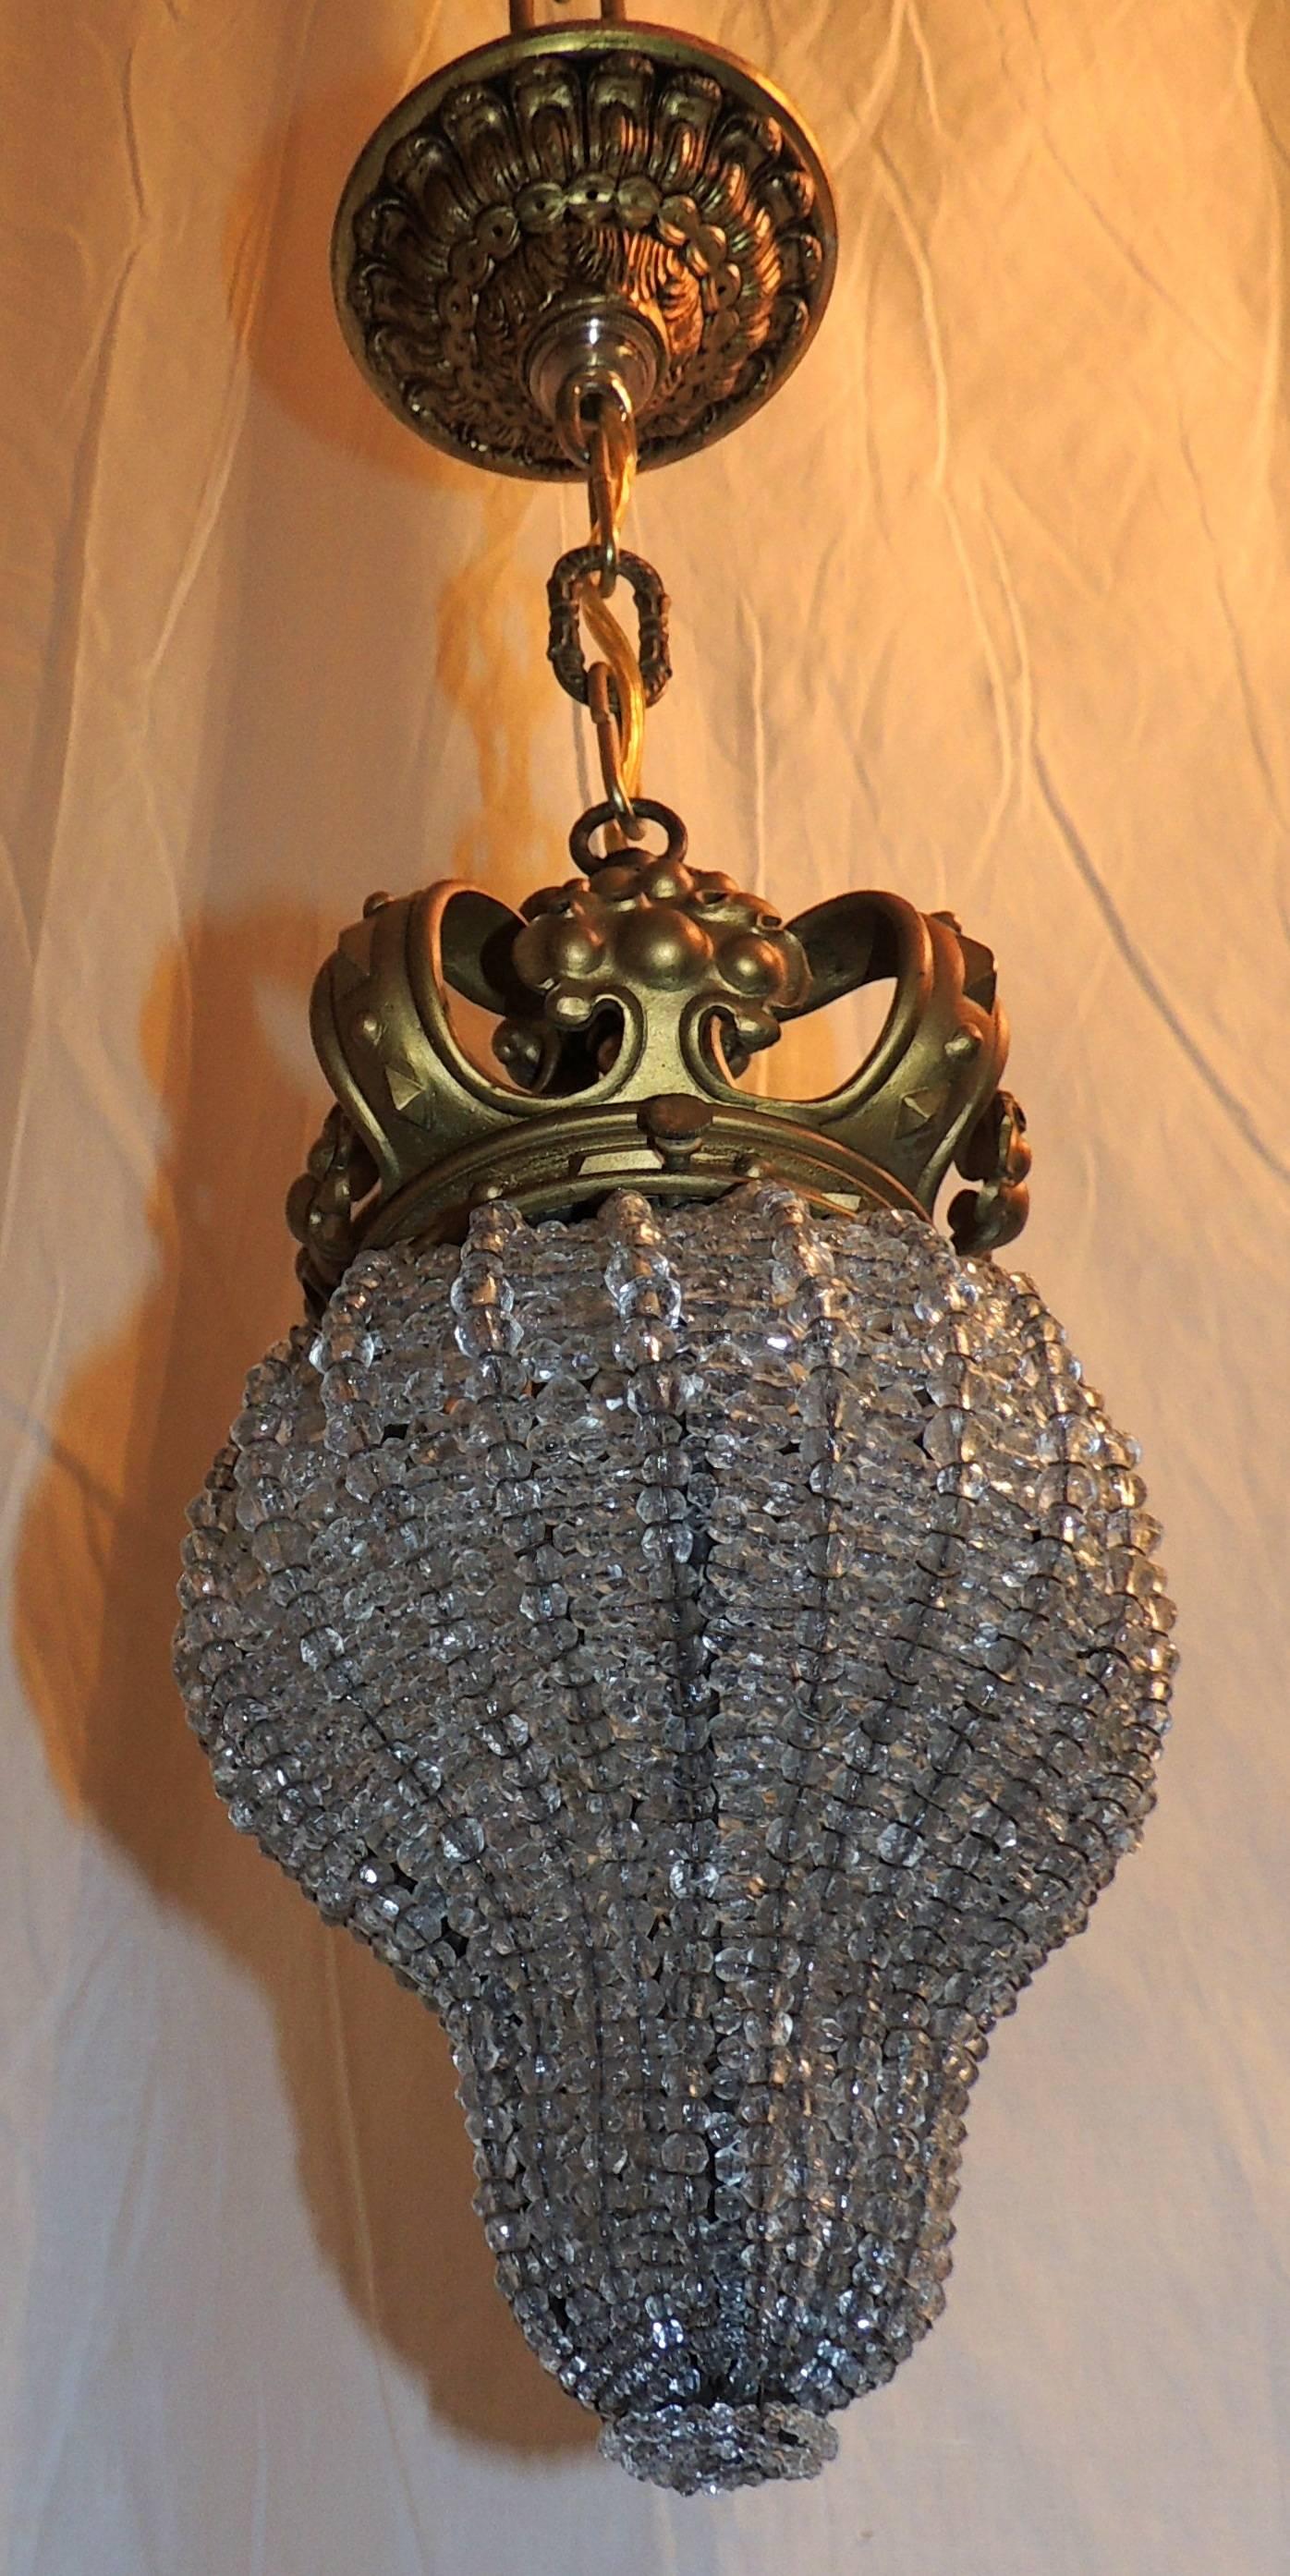 Wonderful French bronze crown and beaded light fixture chandelier.